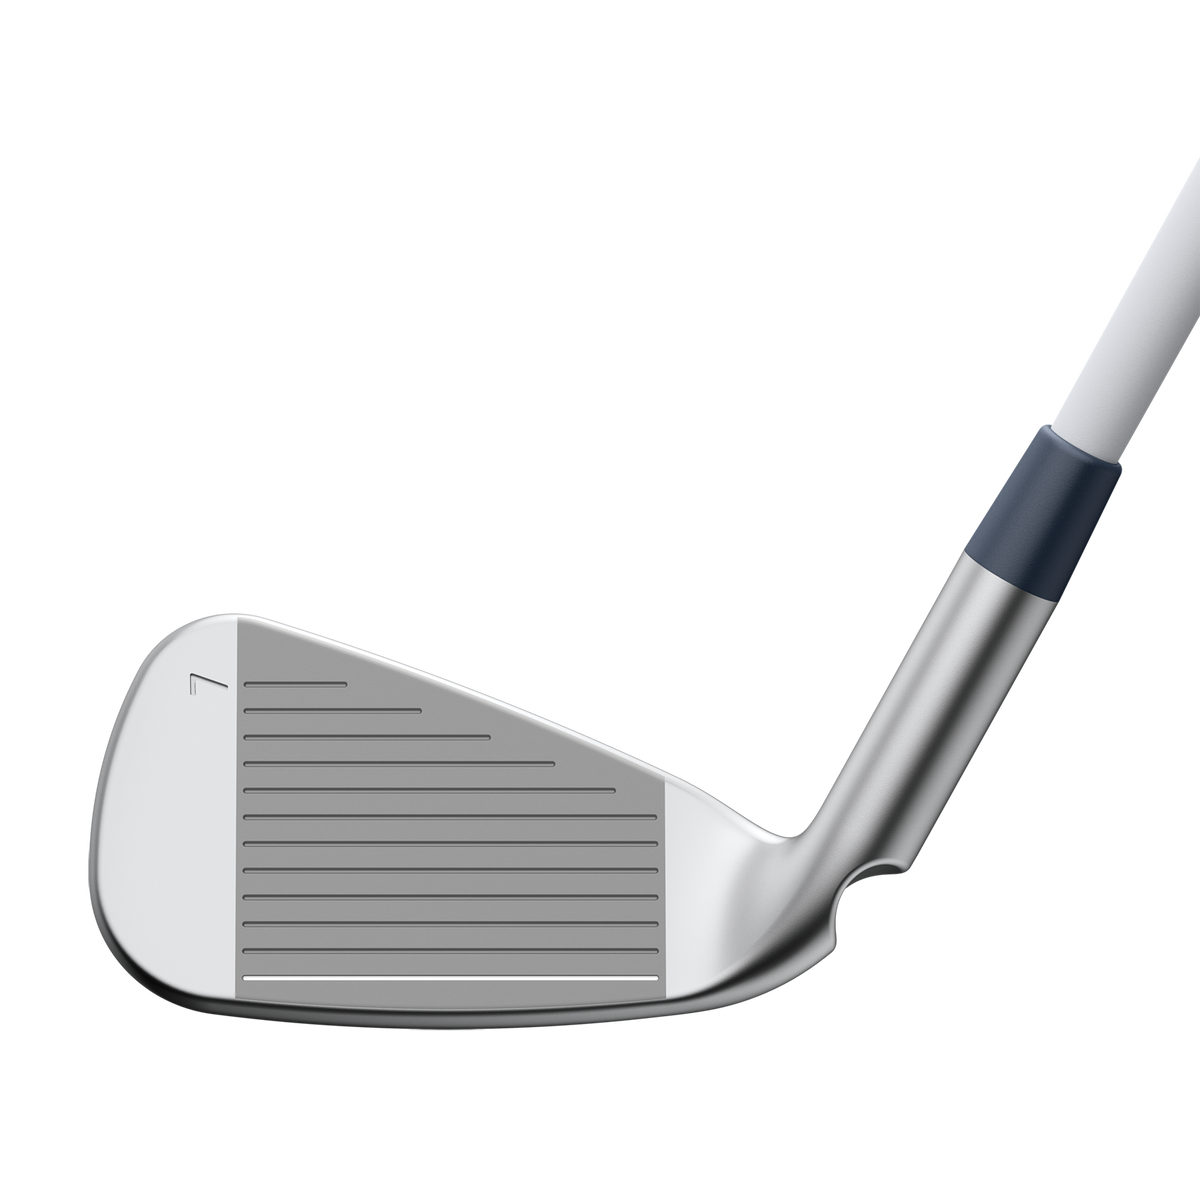 PING Women's G Le3 Irons